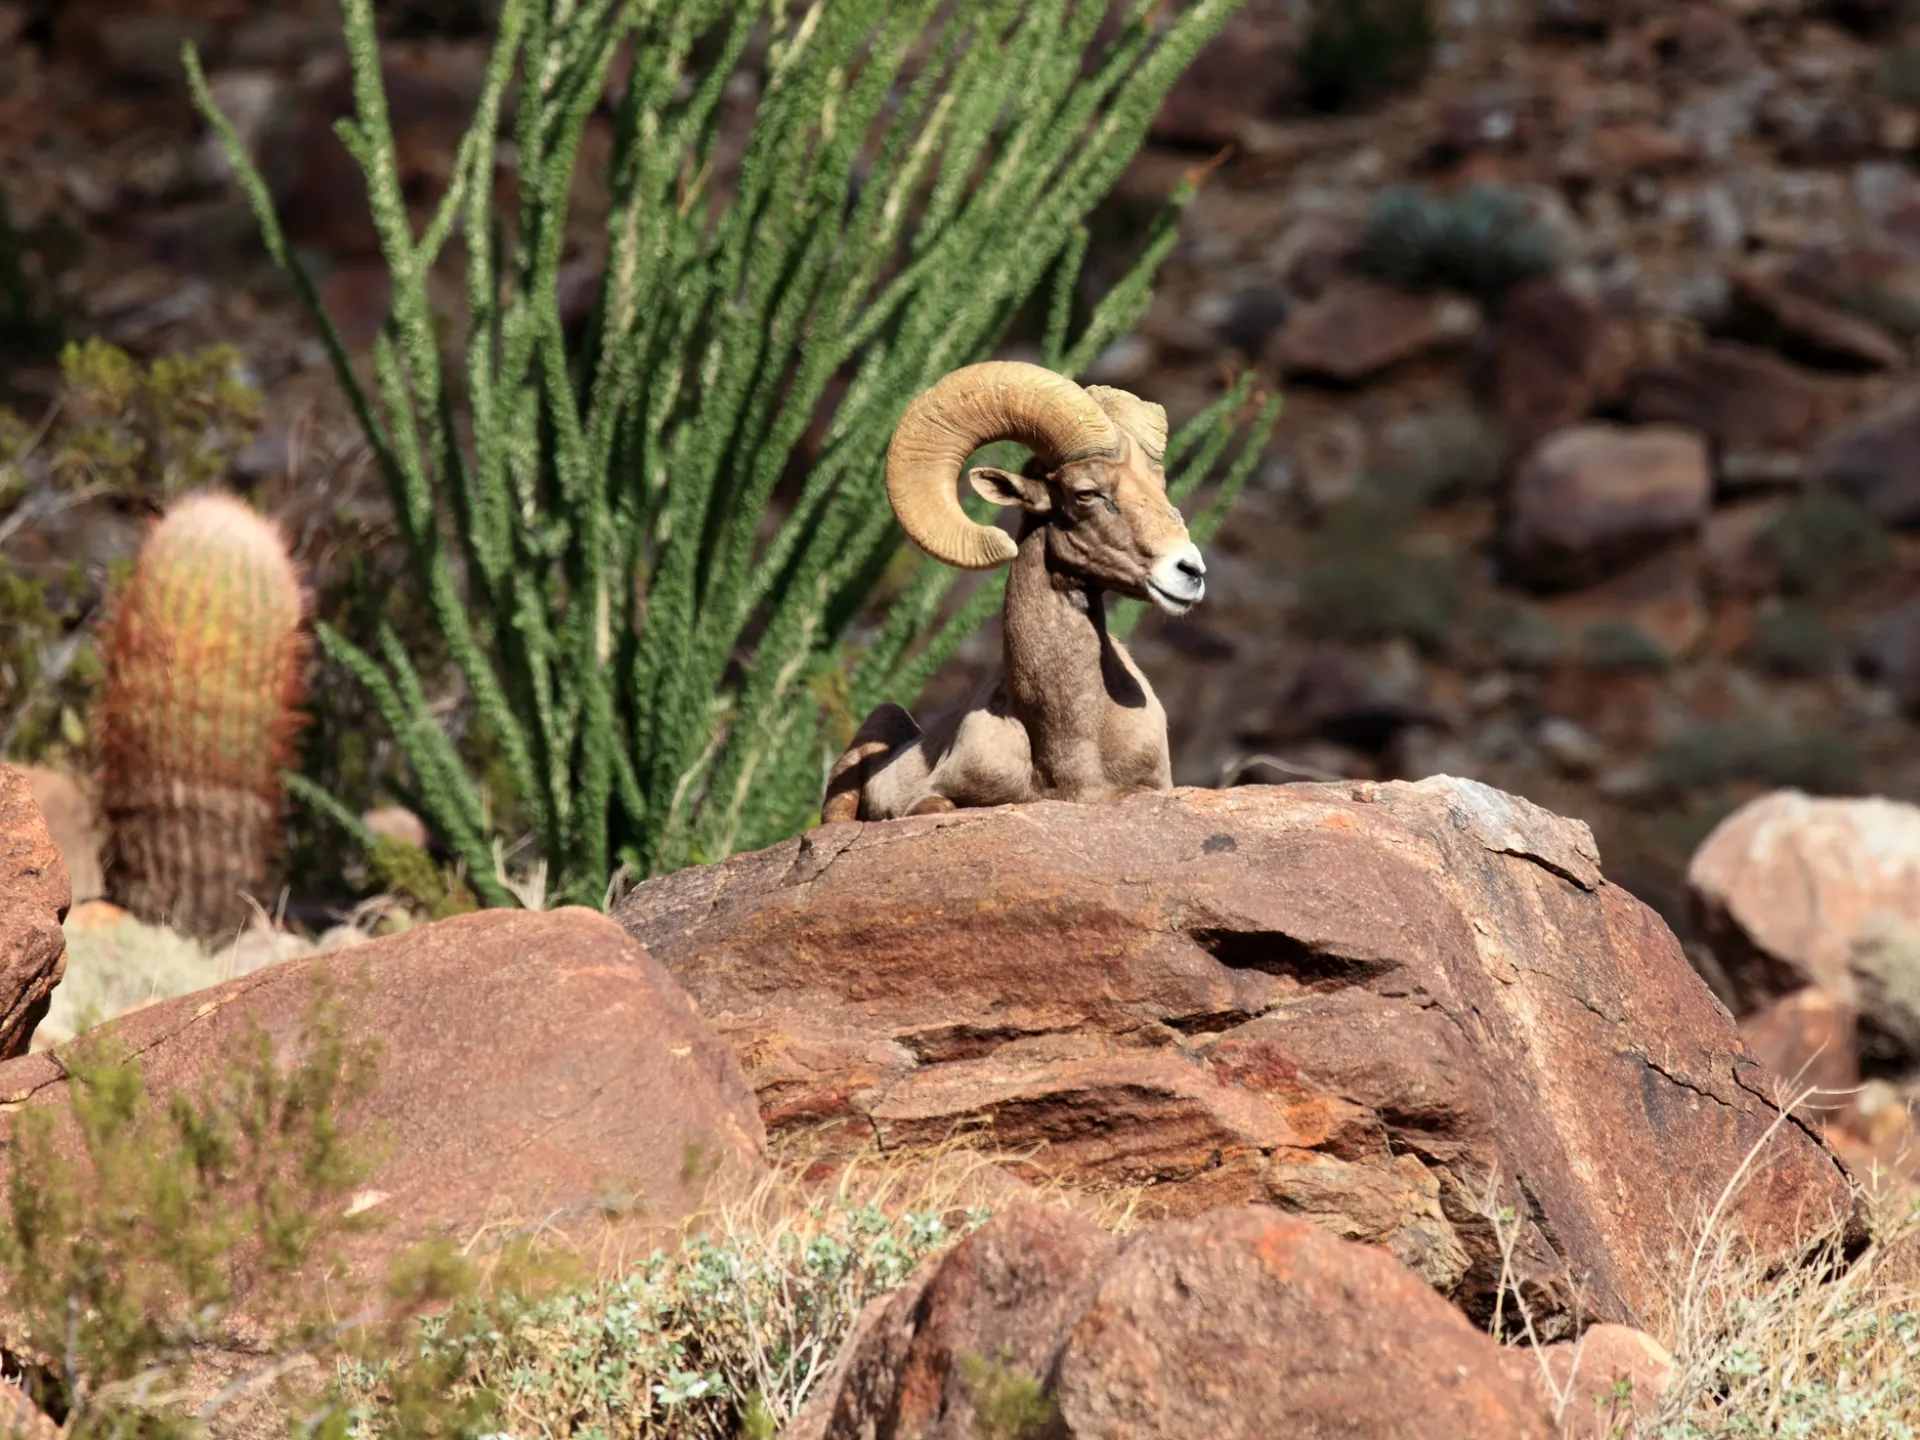 Desert bighorn sheep (Ovis canadensis nelsoni) resting in Anza-Borrego desert. Be sure to keep your distance! 